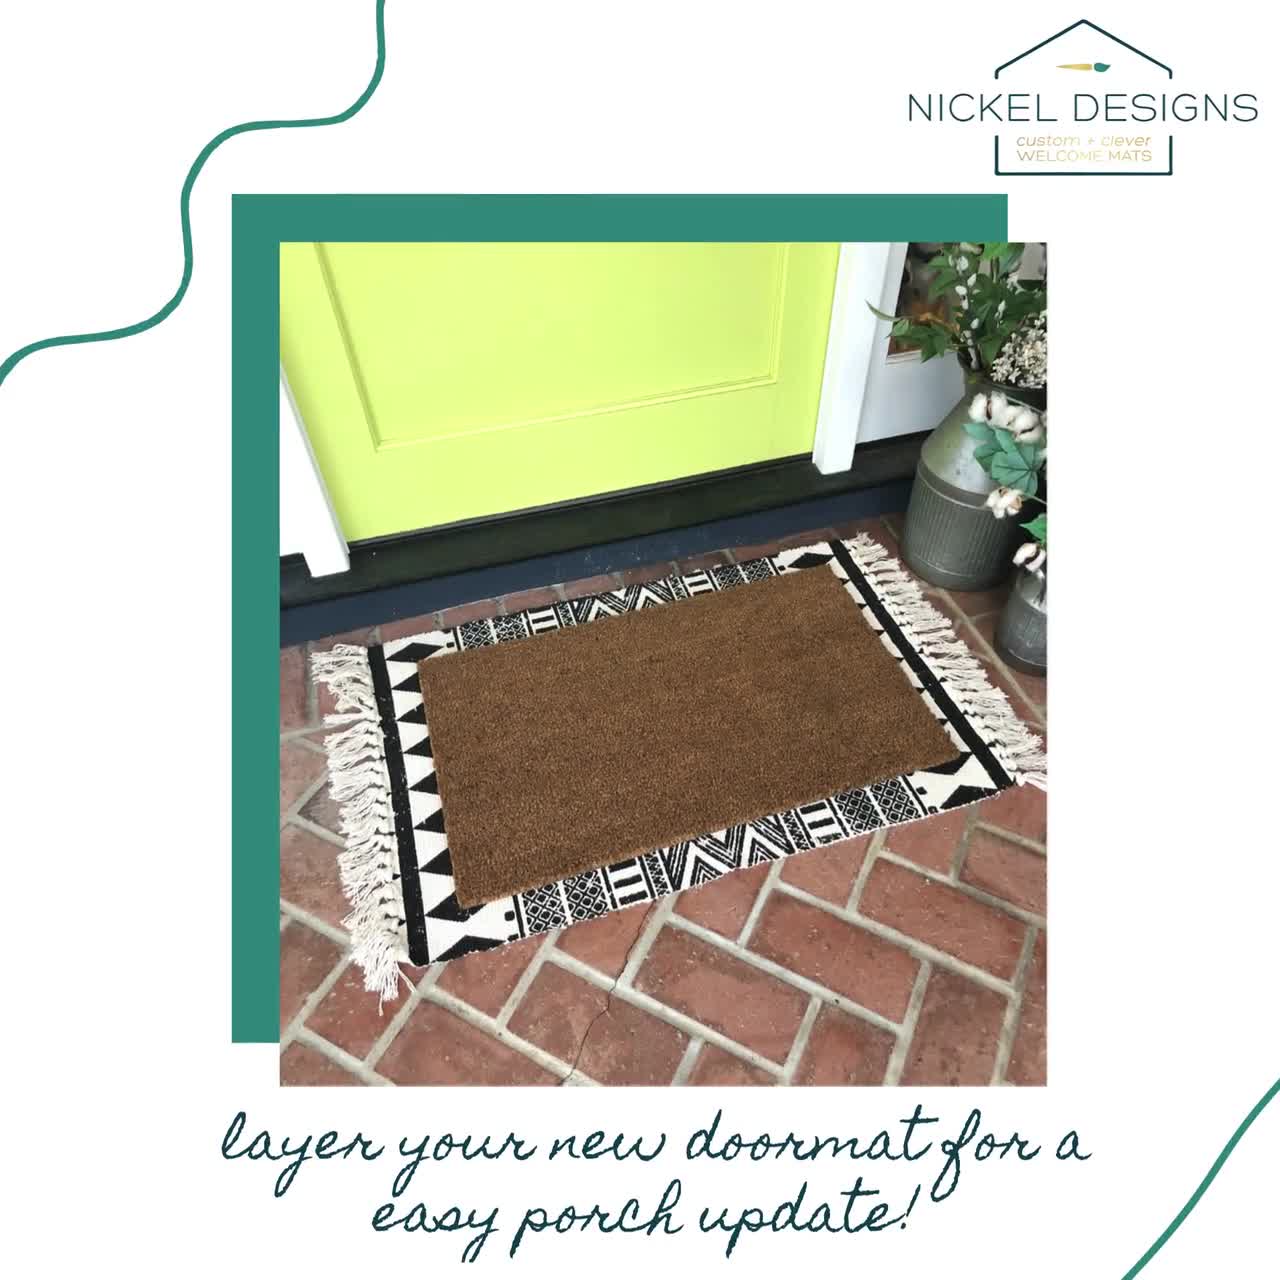 https://v.etsystatic.com/video/upload/q_auto/welcome_fall_with_a_new_doormat_4_c2eodz.jpg